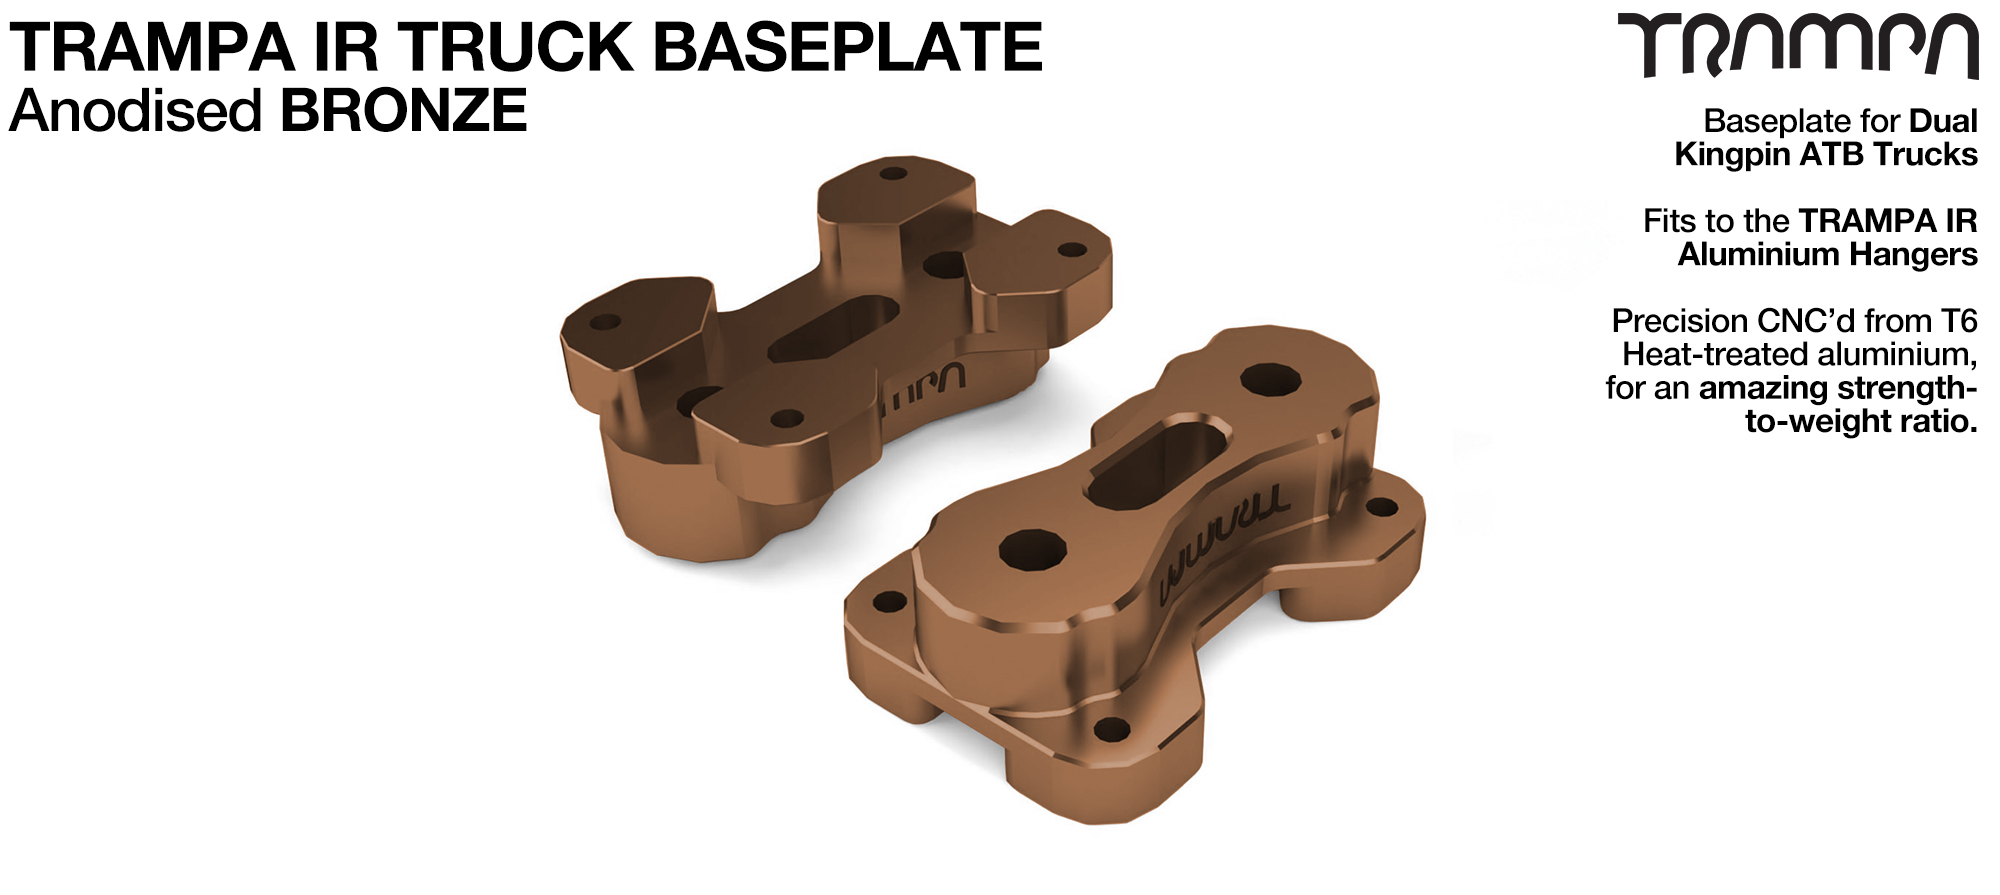 TRAMPA IR BASEPLATE - CNC Precision made TRAMPA IR Trucks are super light & Packed with performance - BRONZE